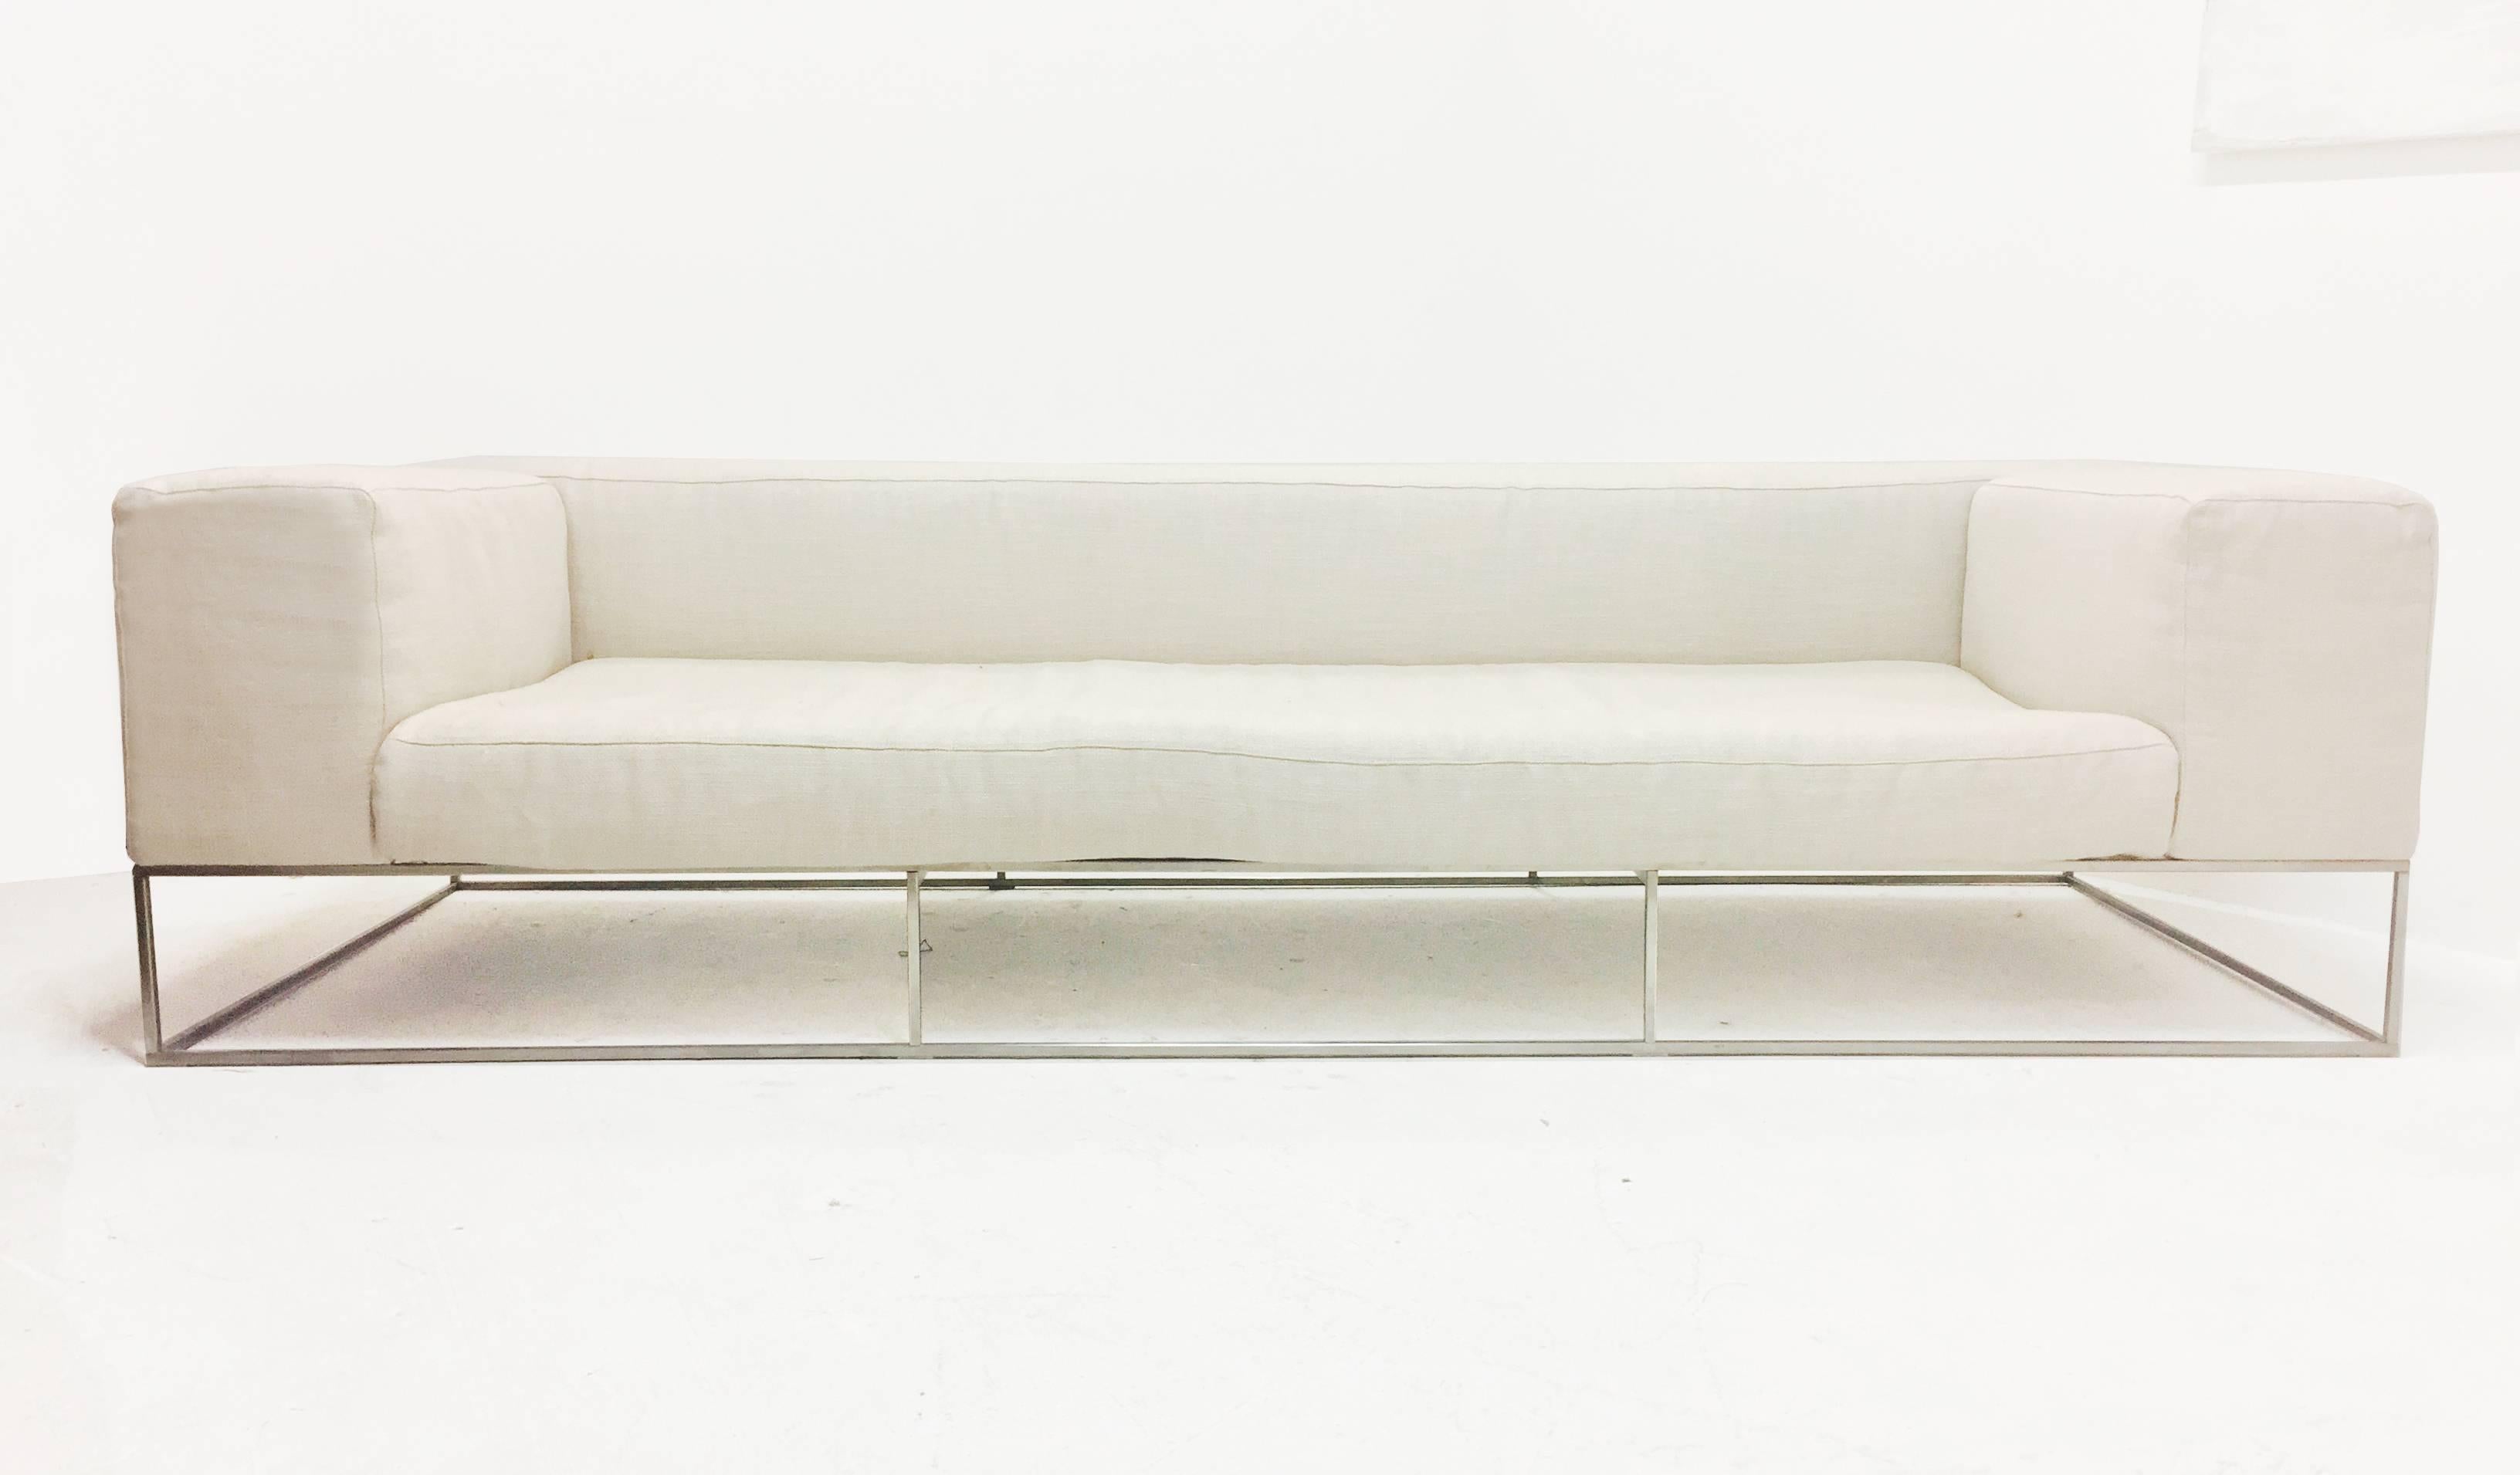 Ile club sofa by Piero Lissoni for Living Divani. Perfect sofa for style and comfort. New upholstery is recommended, there is some fading on backrest. The frame is constructed of square tubular polished steel, circa 2003.

Dimensions: 98 x 37 x 25